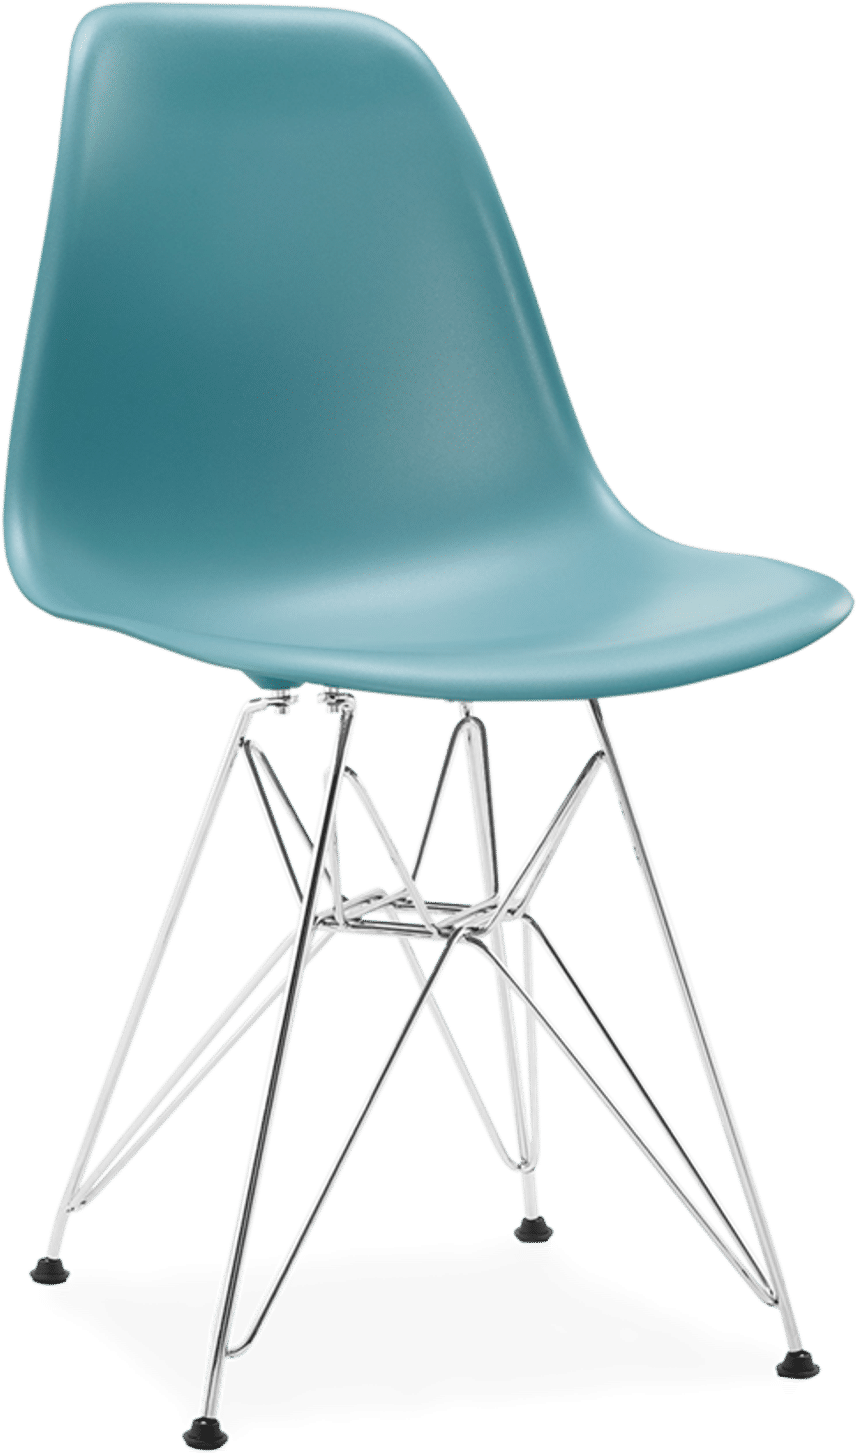 DSR Style Chair Teal image.